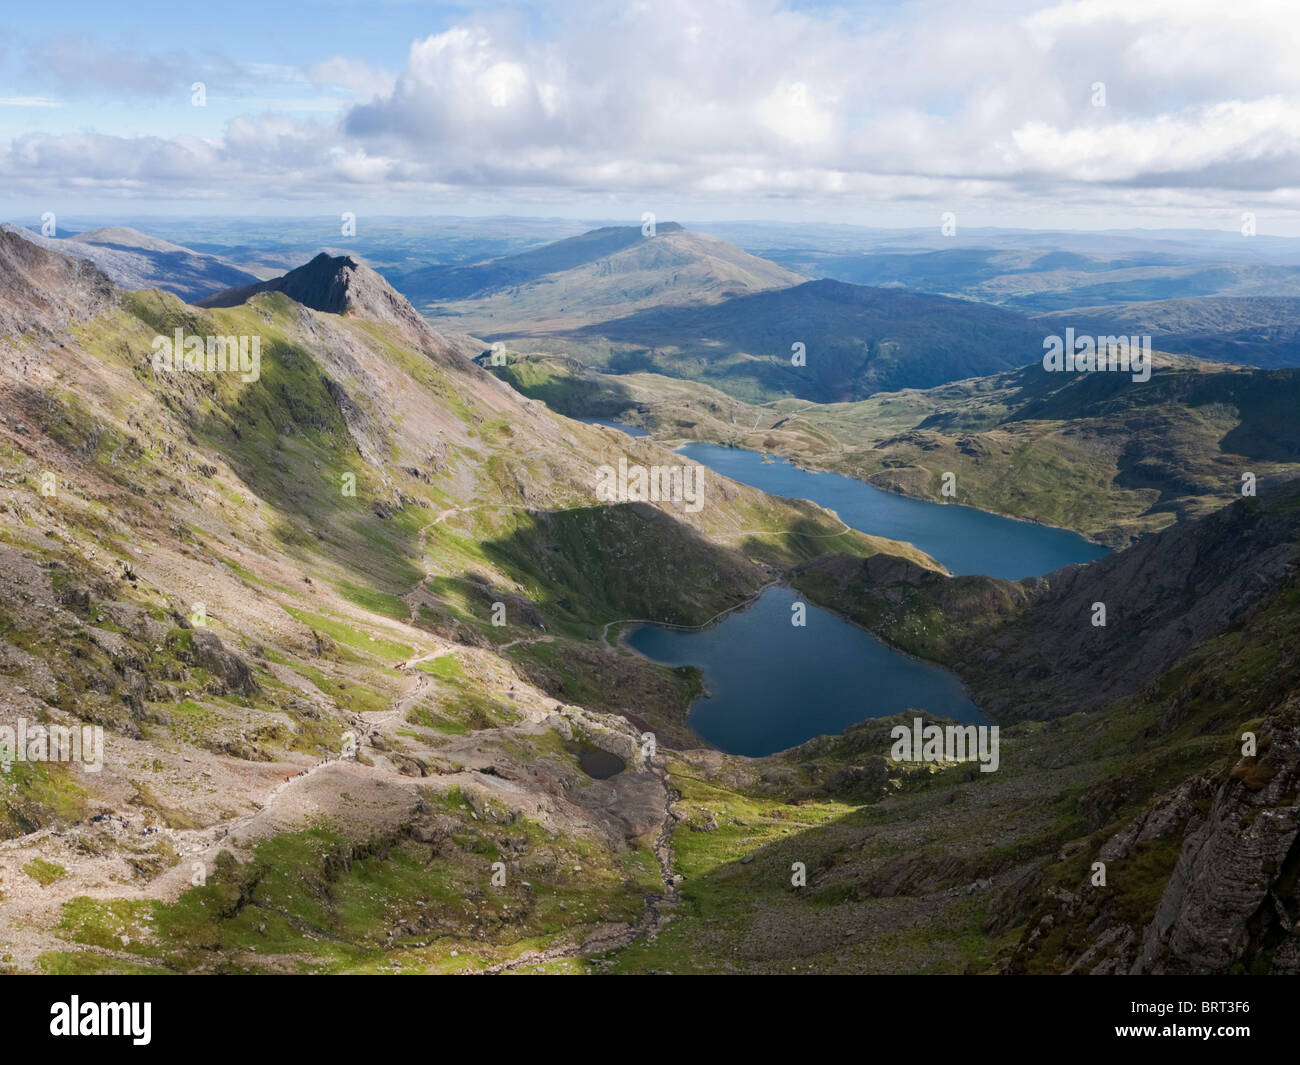 The view down Cwm Dyli from near the top of Snowdon, showing the the Pyg Track, Crib Goch, Glaslyn and Llyn Llydaw Stock Photo